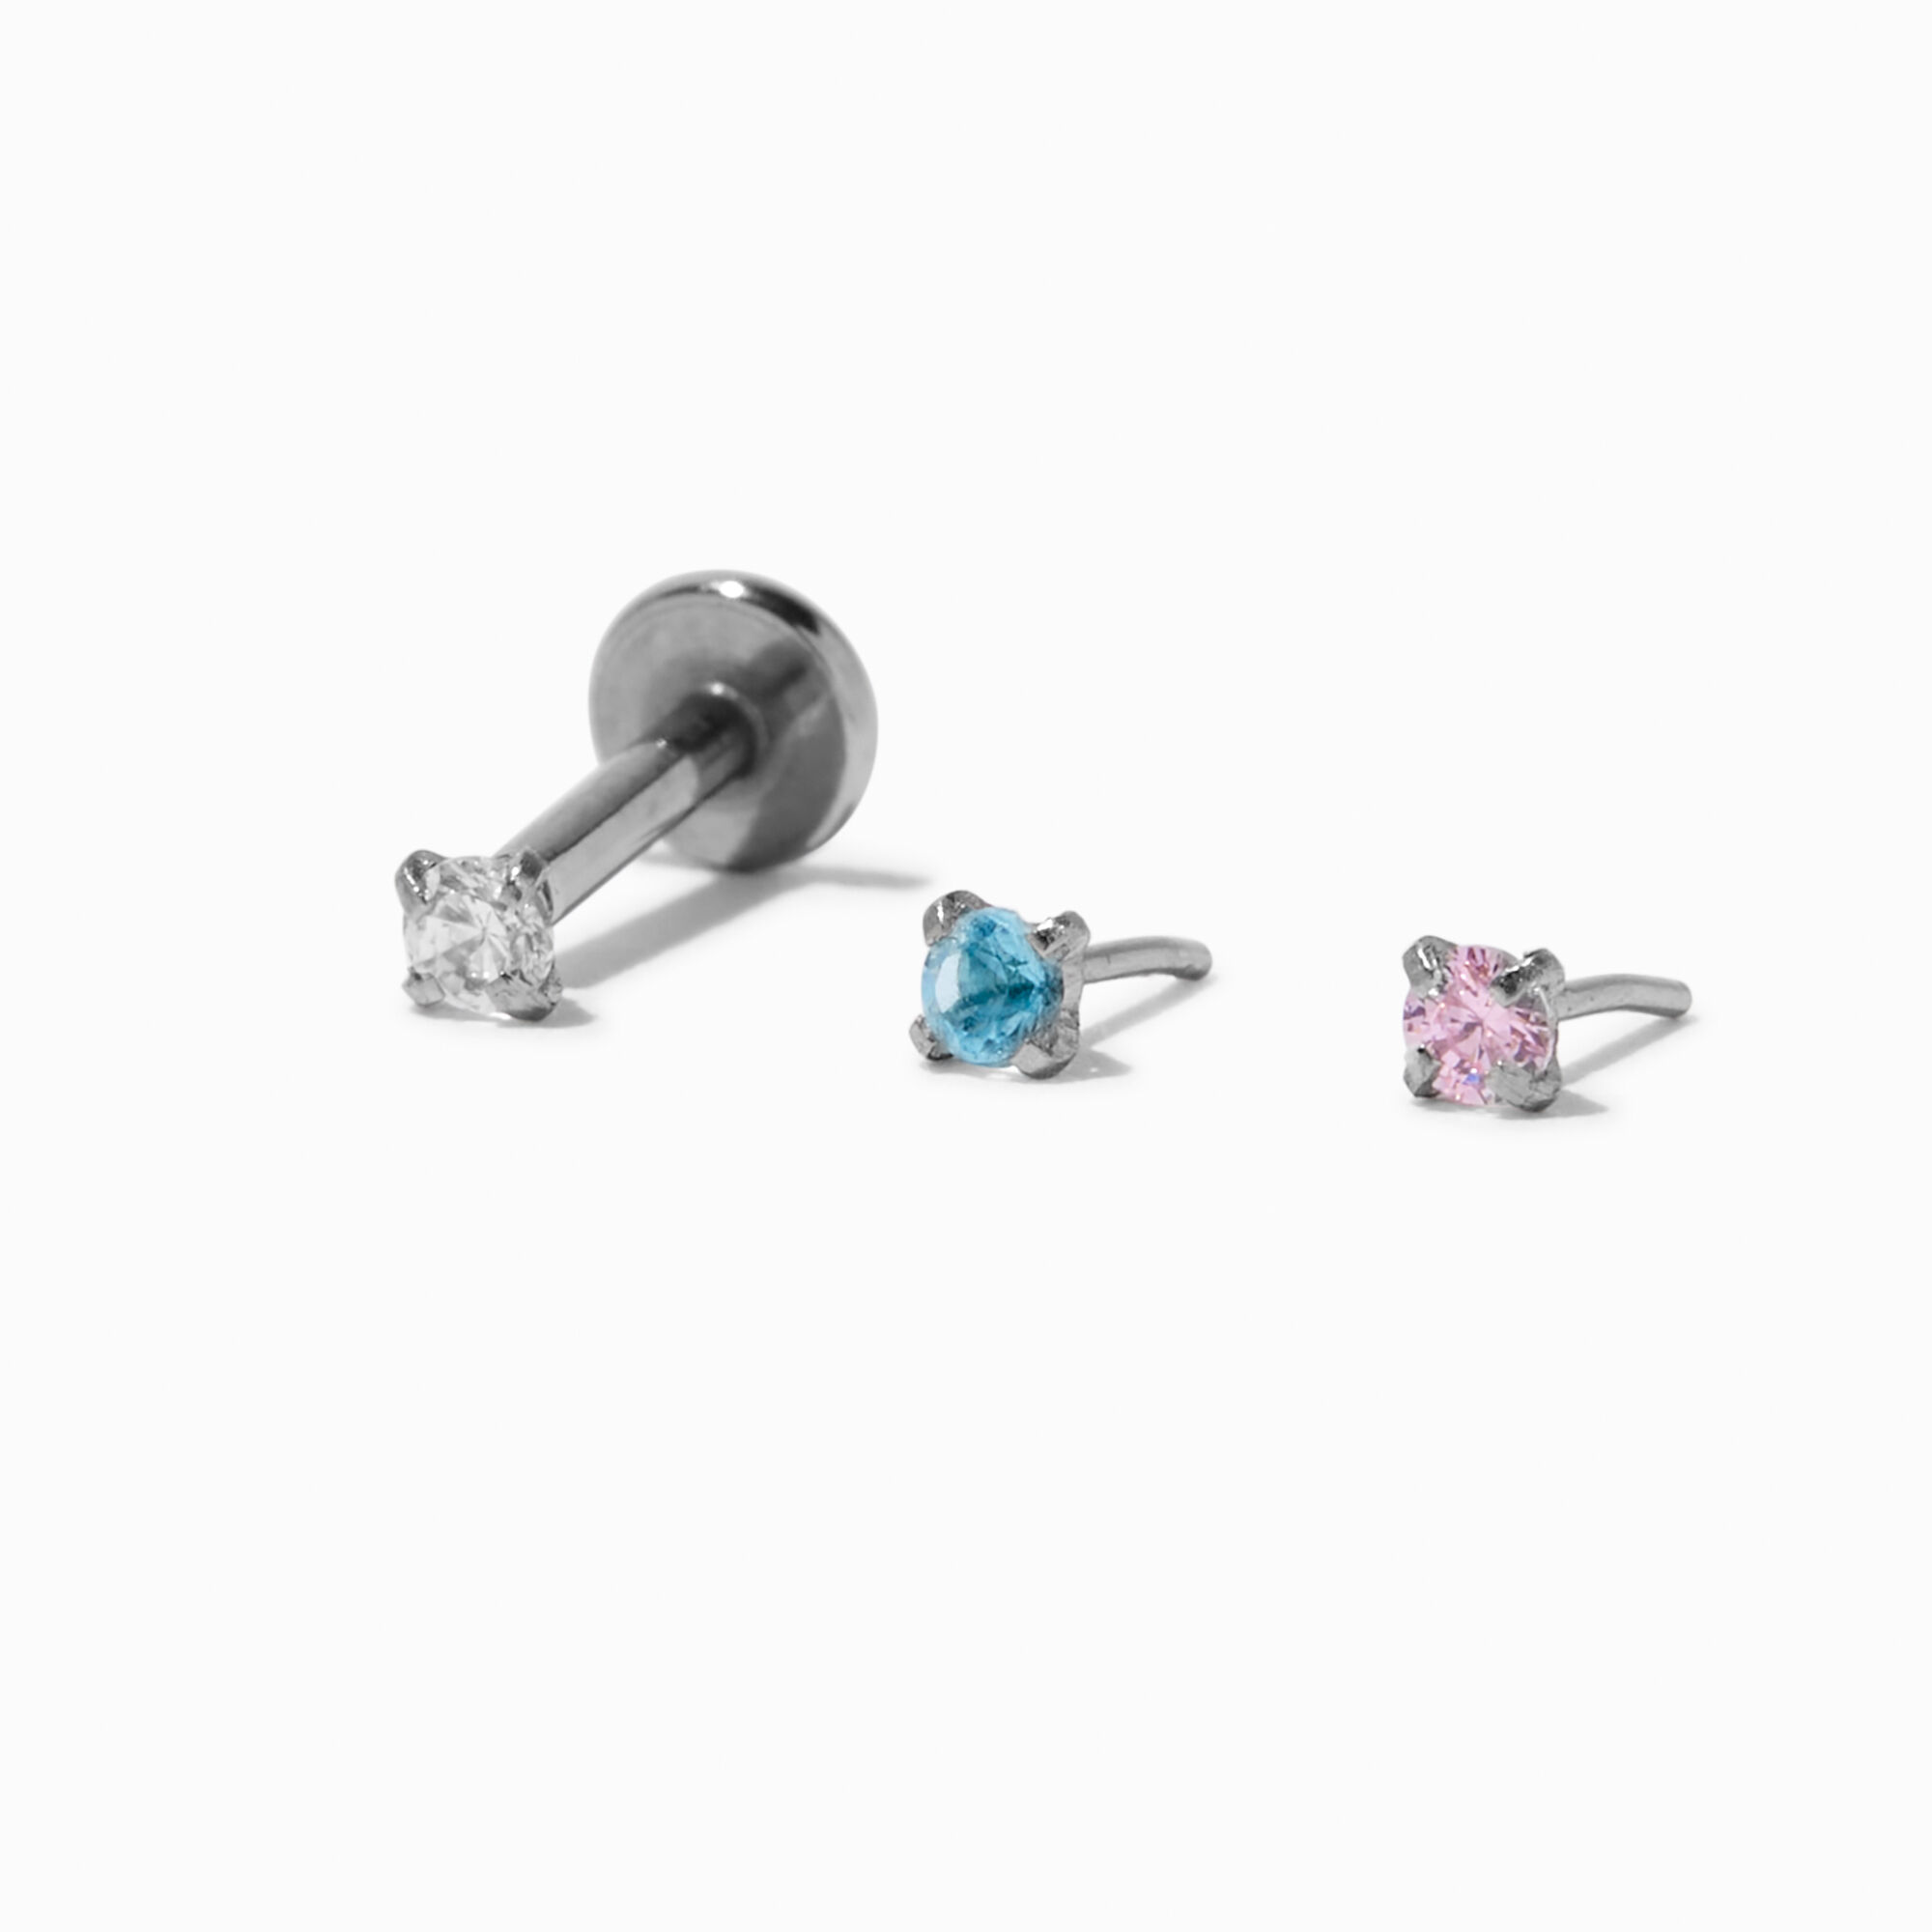 View Claires 16G Changeable Stud Cartilage Earrings 3 Pack Silver information